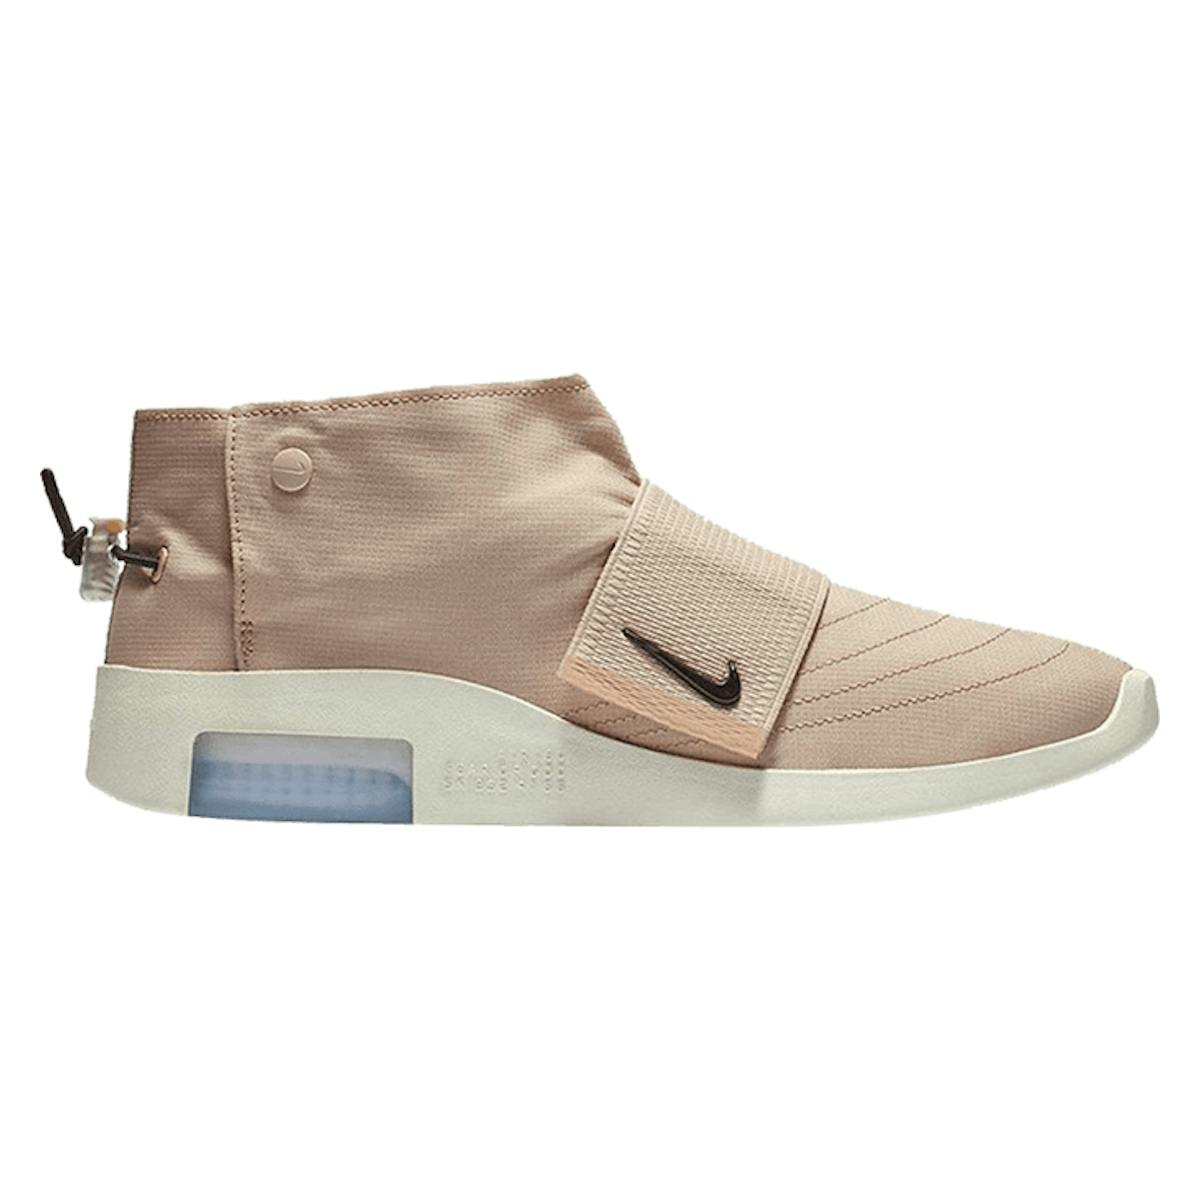 Nike Air Fear of God Moc "Particle Beige"